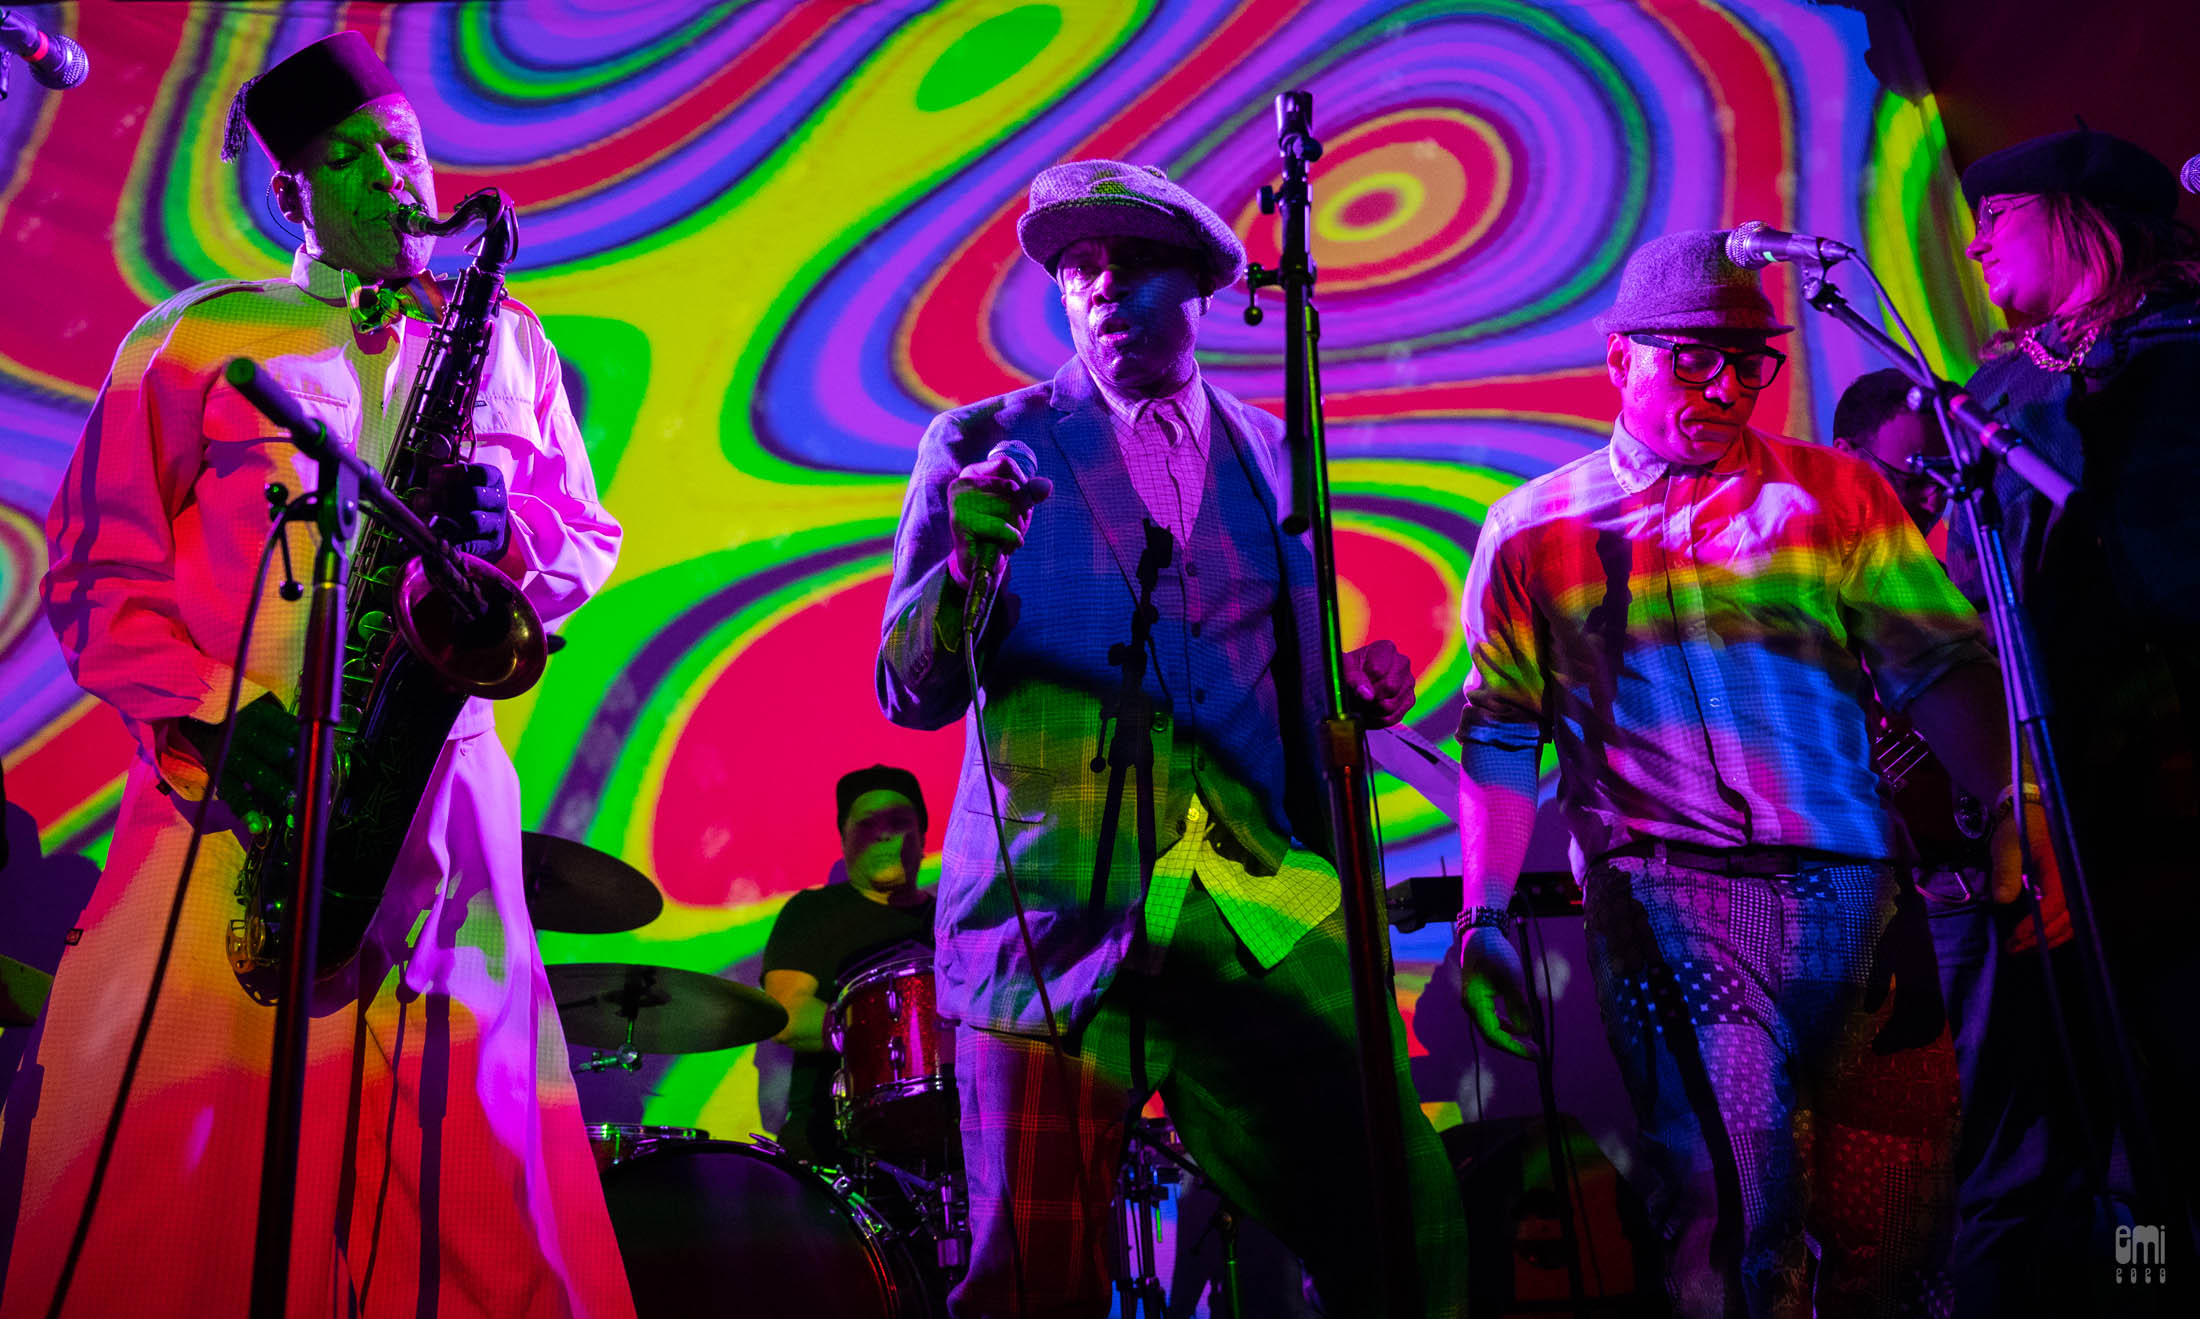 2023.31.0 Soul Ska featuring Angelo Moore with Zach Rodell Video Projection at The Chapel SF. photo by emi